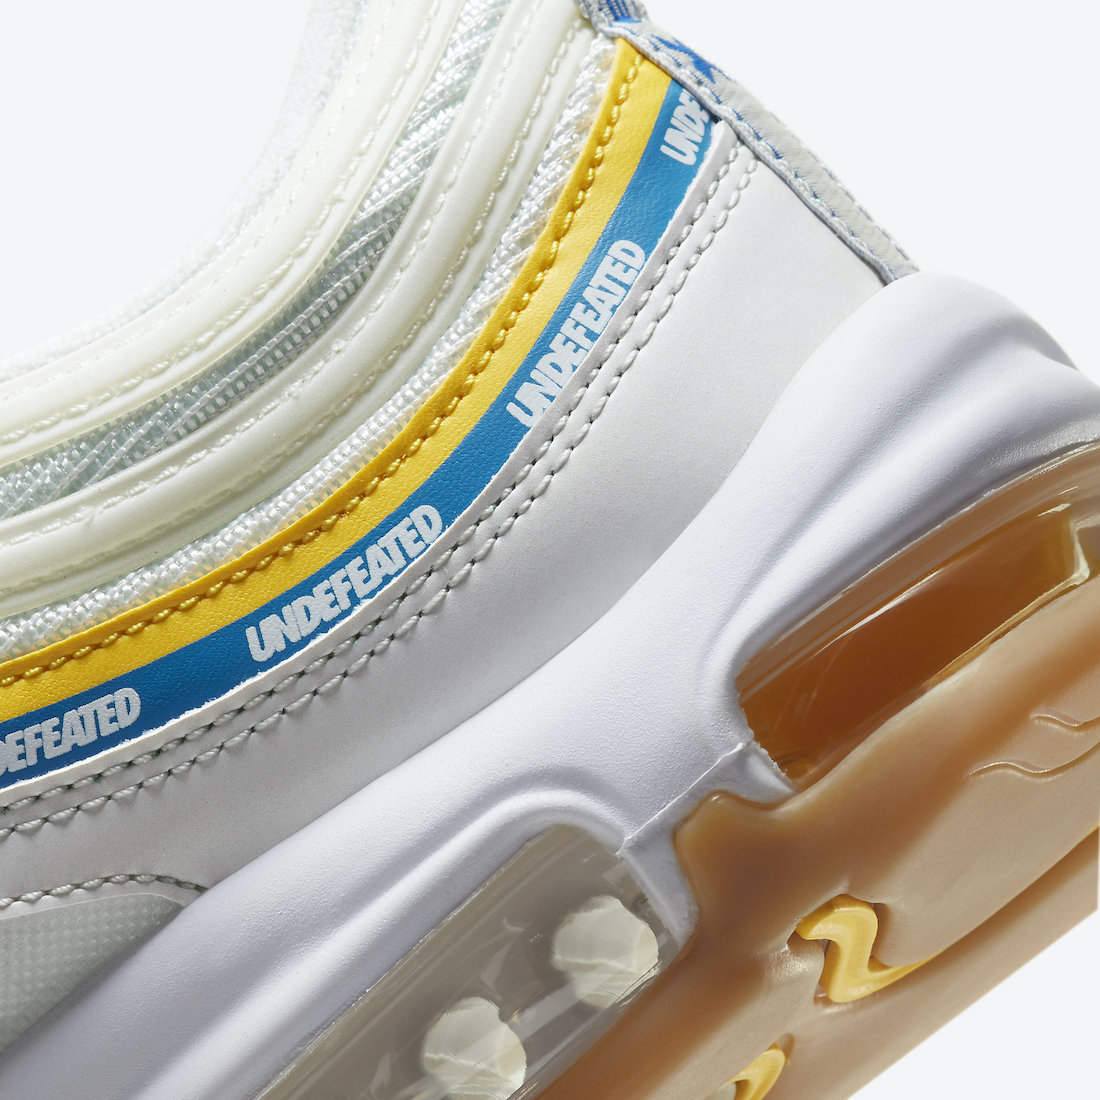 Undefeated Nike Air Max 97 Sail DC4830 100 Release Date